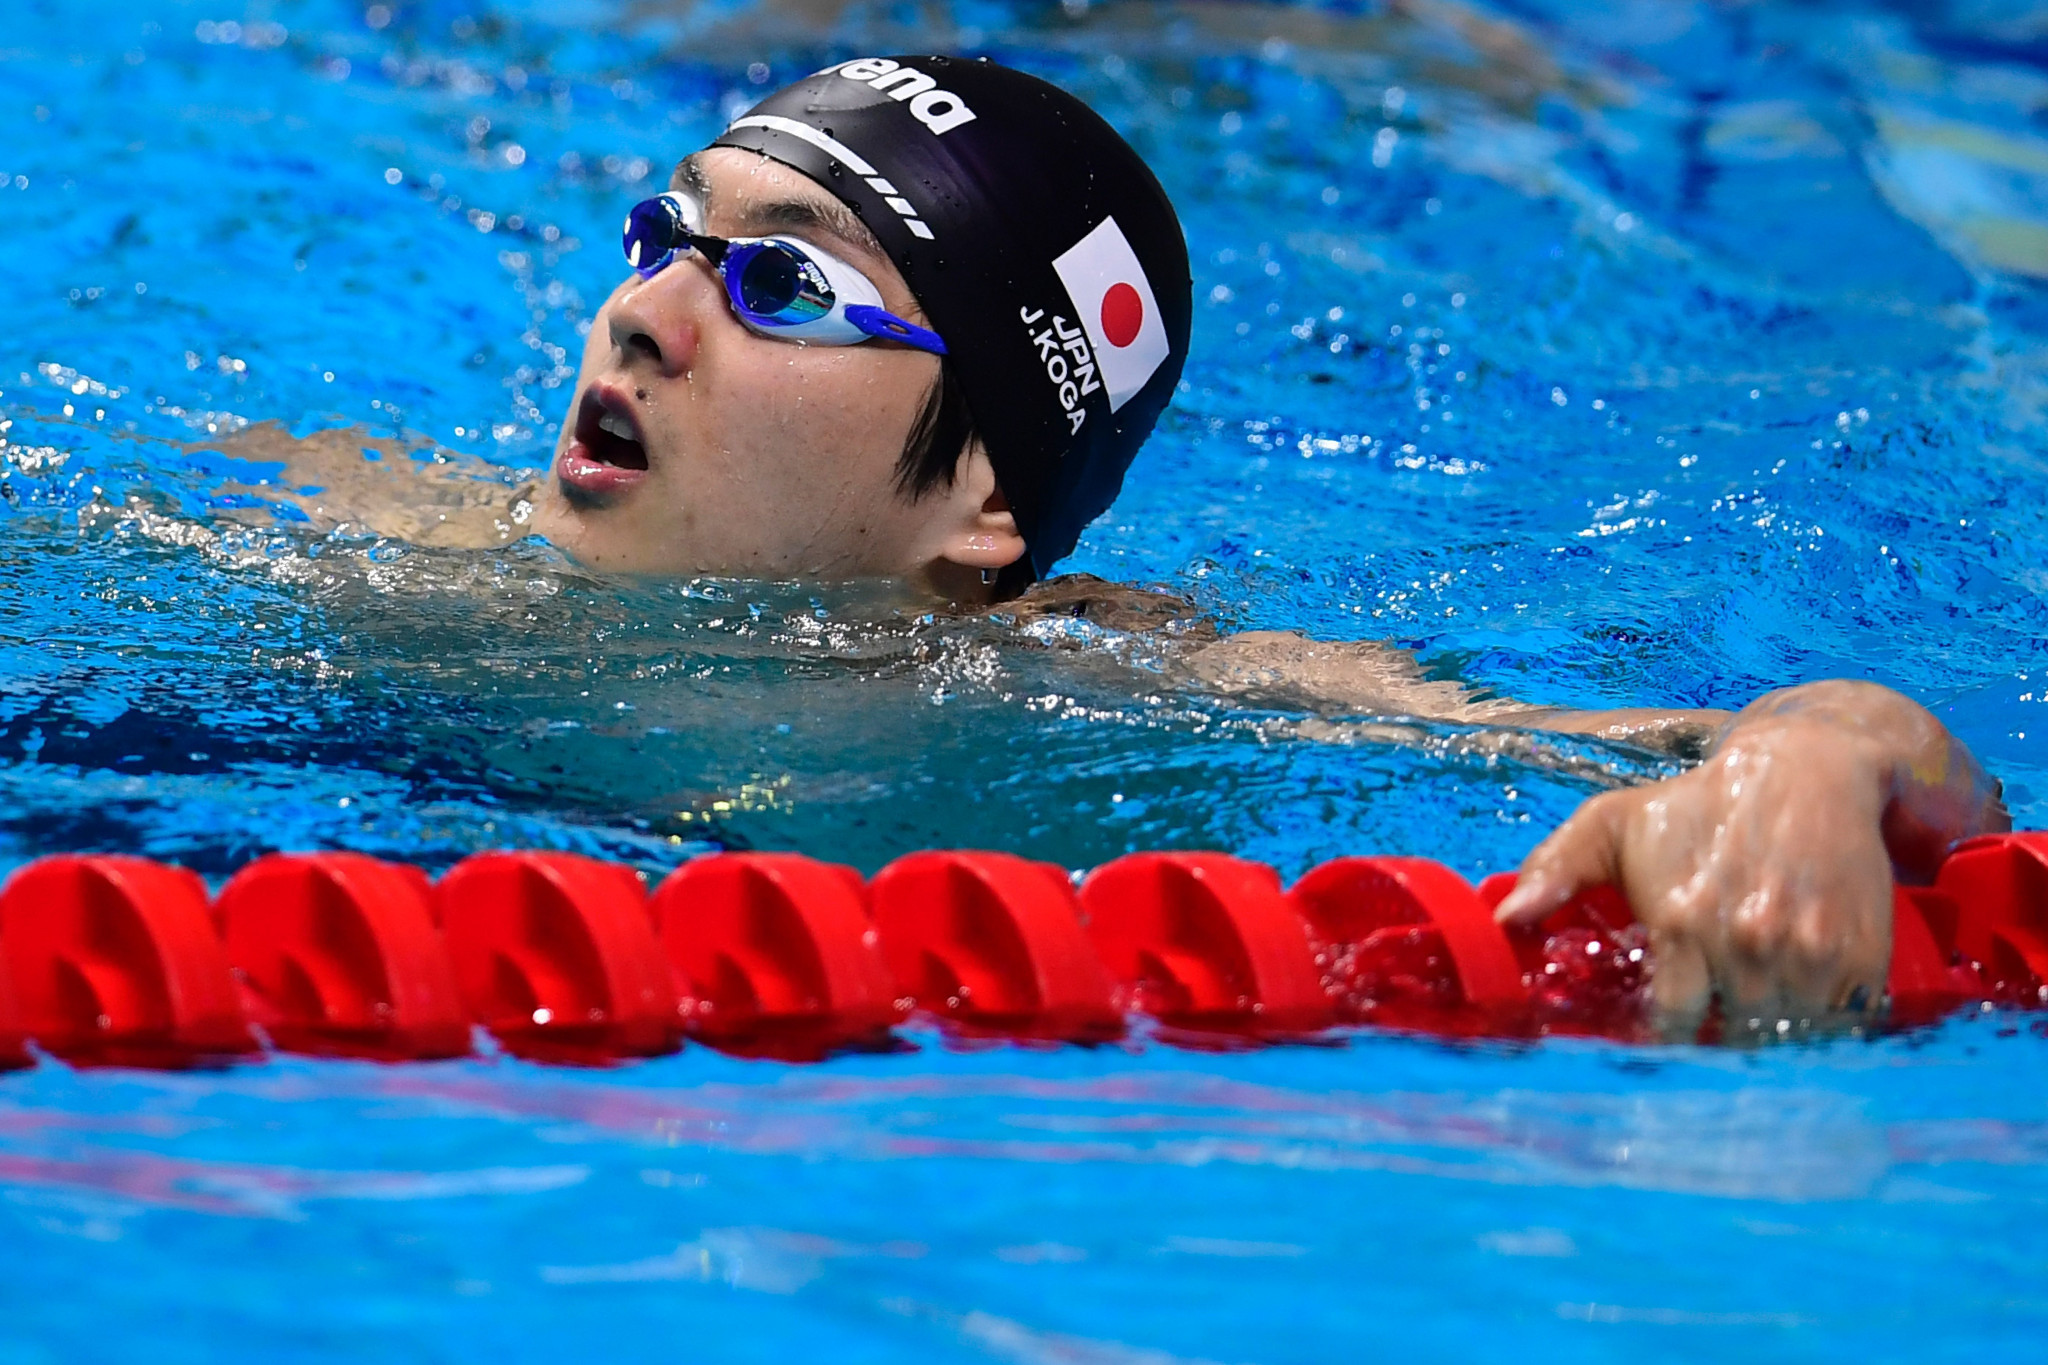 Top Japanese swimmer withdrawn from Asian Games squad after failed drugs test 